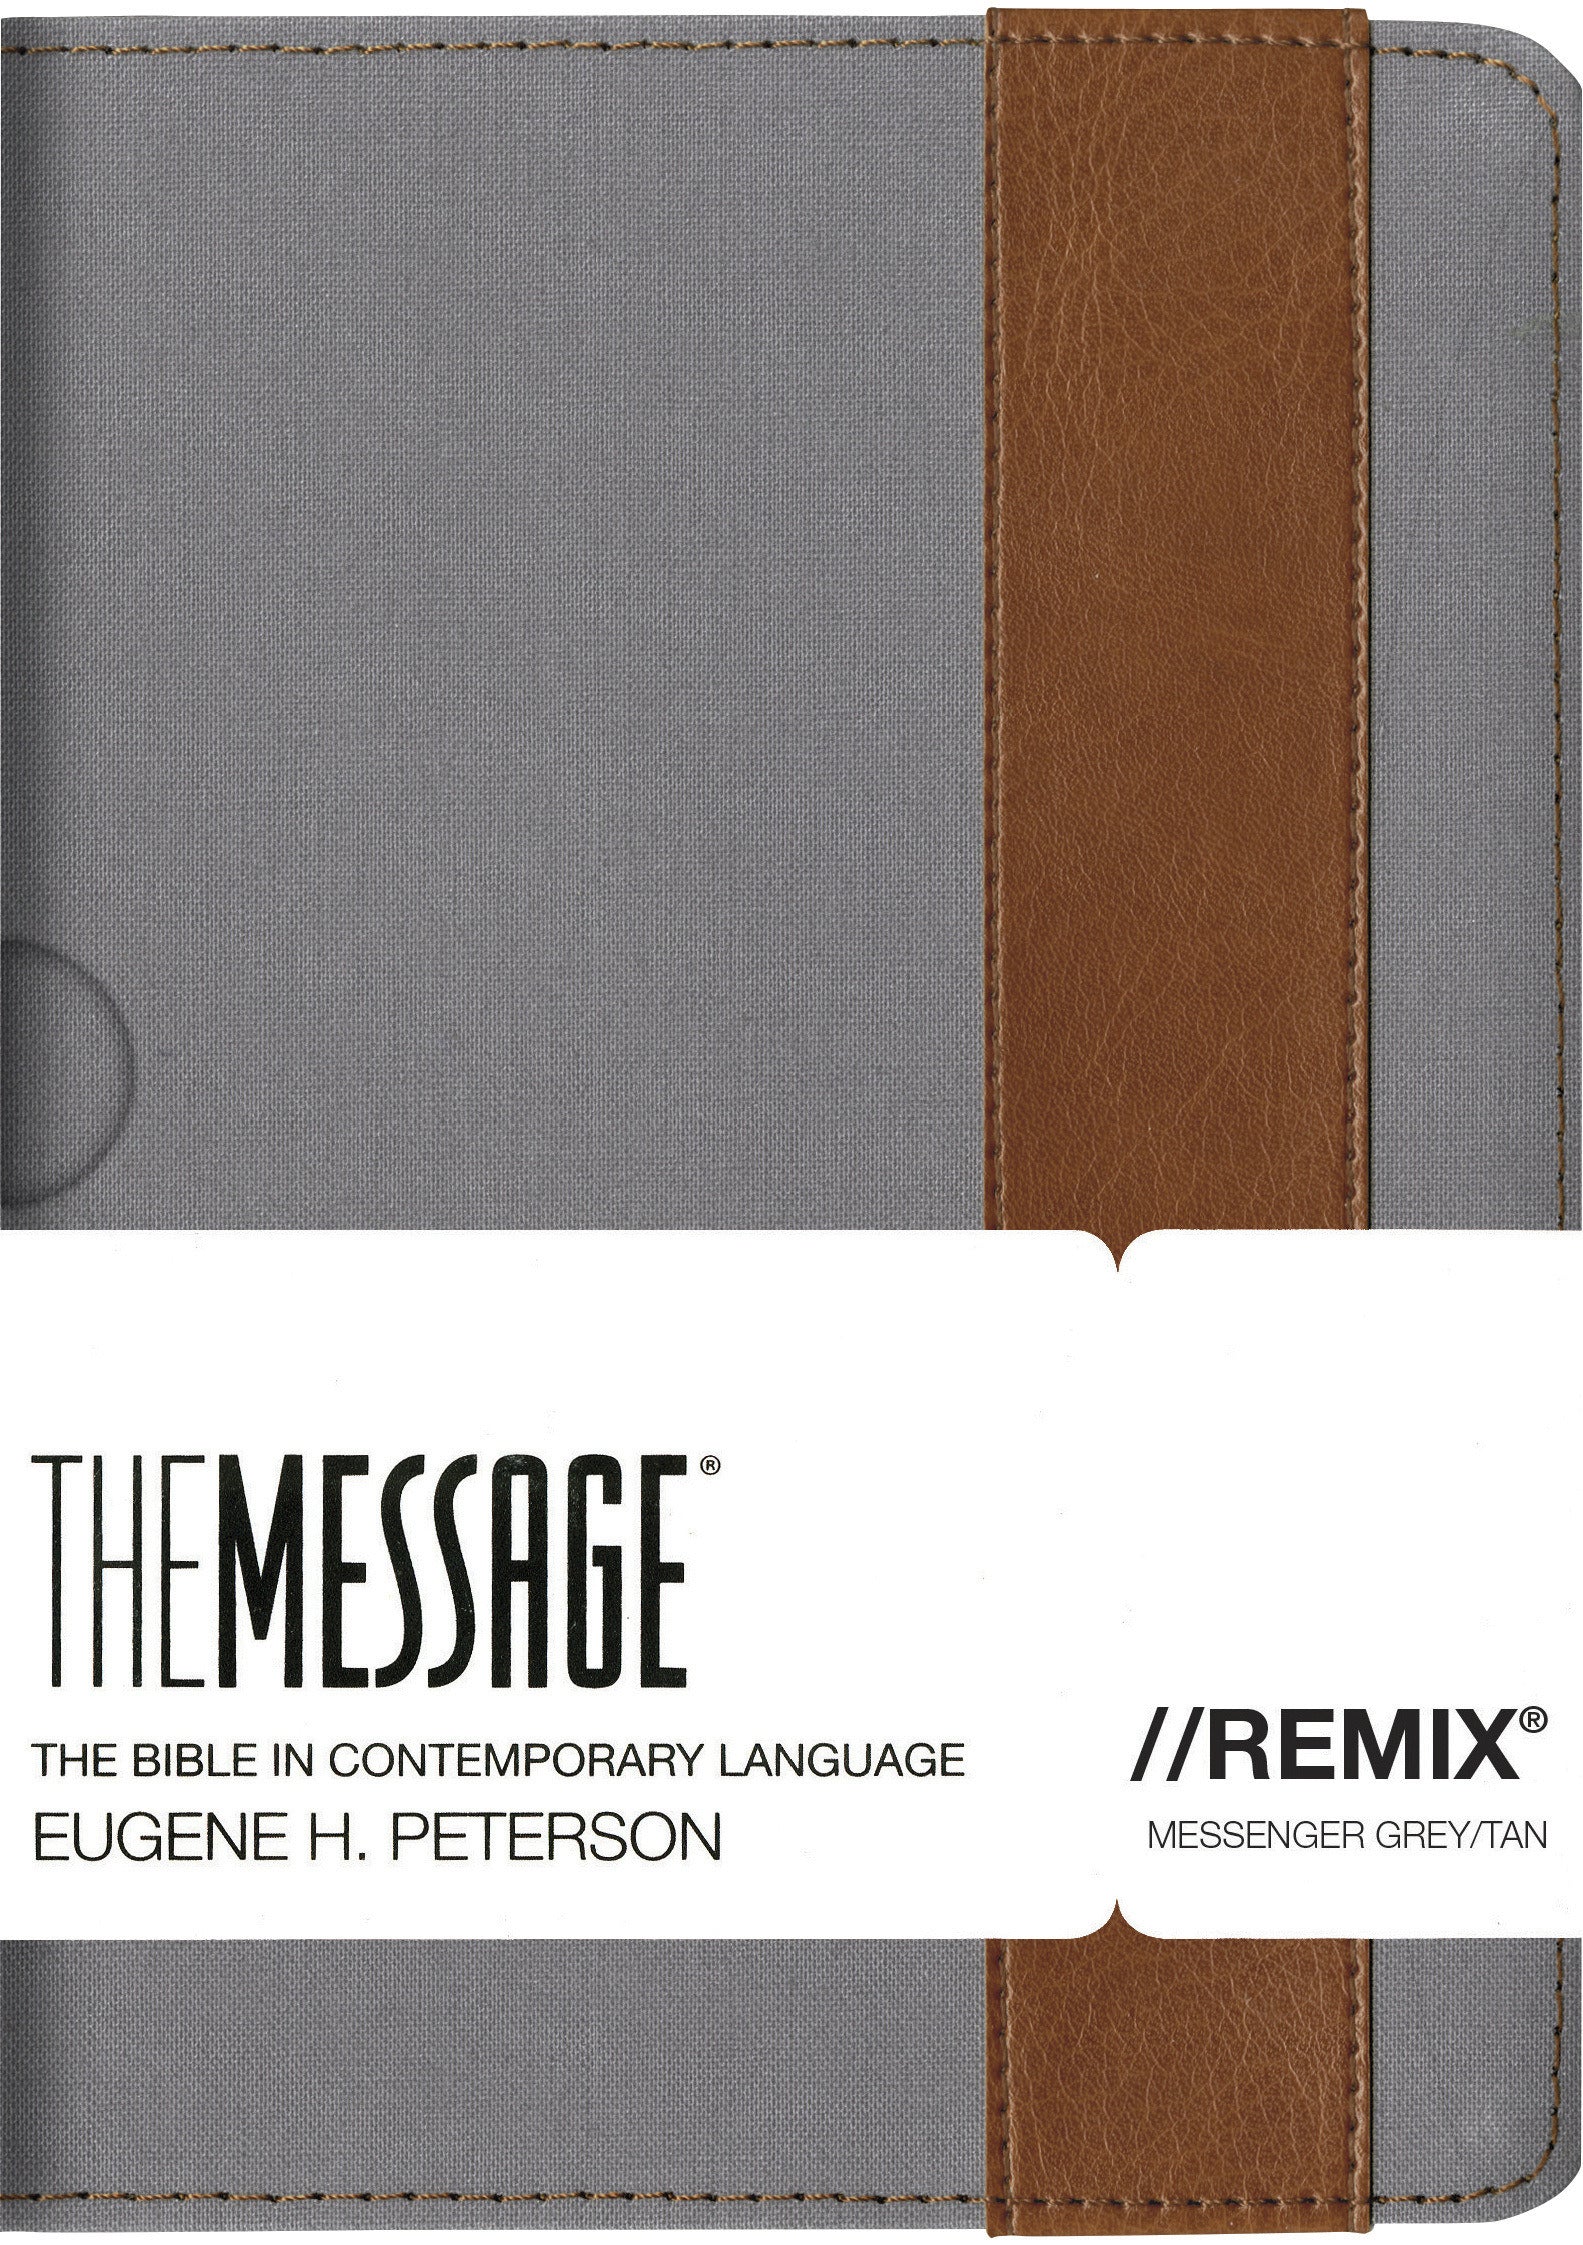 Image of The Message//REMIX other